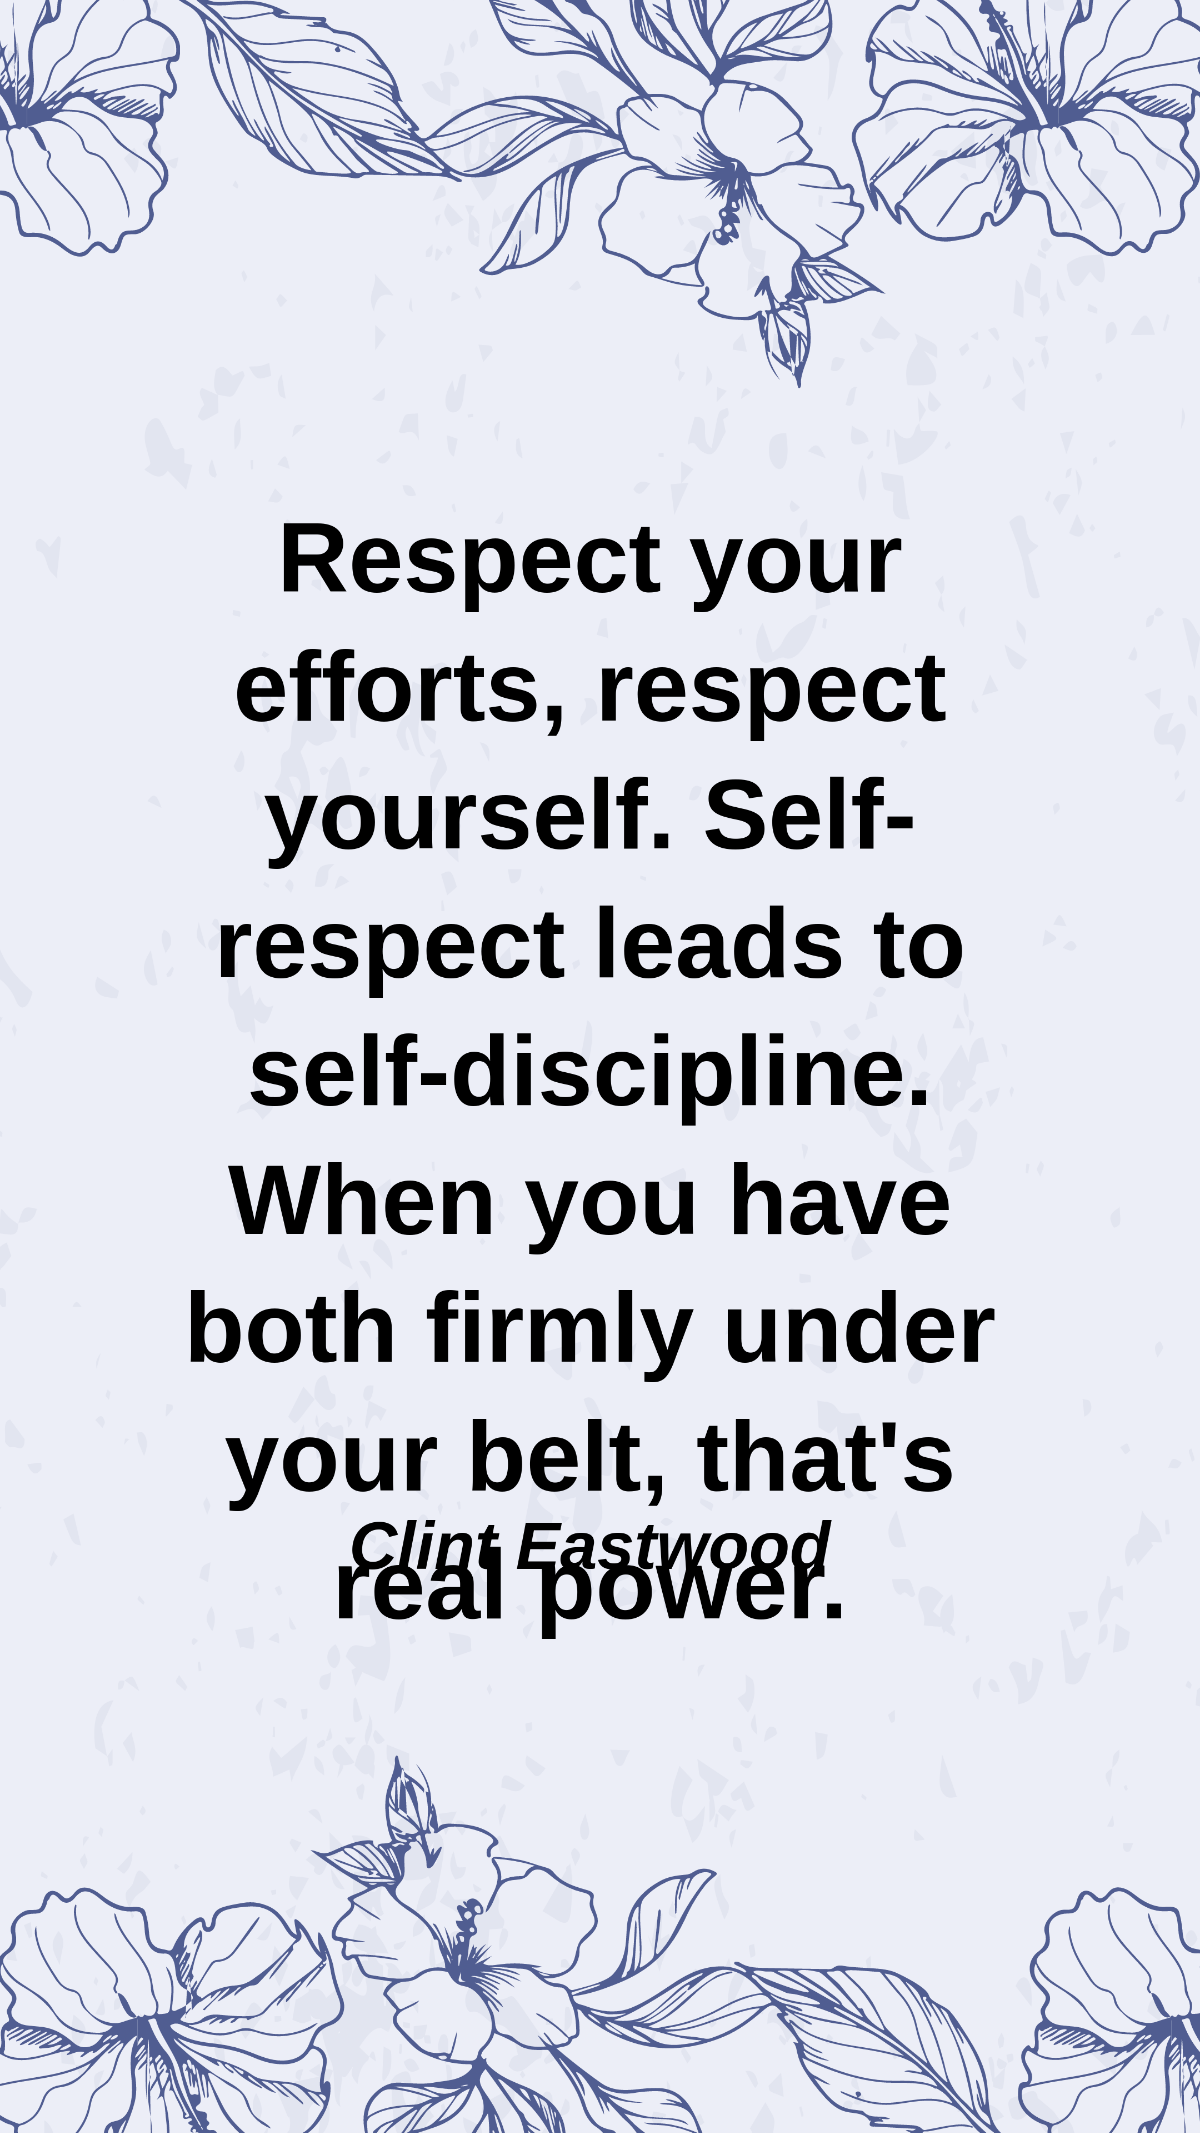 Clint Eastwood - Respect your efforts, respect yourself. Self-respect leads to self-discipline. When you have both firmly under your belt, that's real power. Template